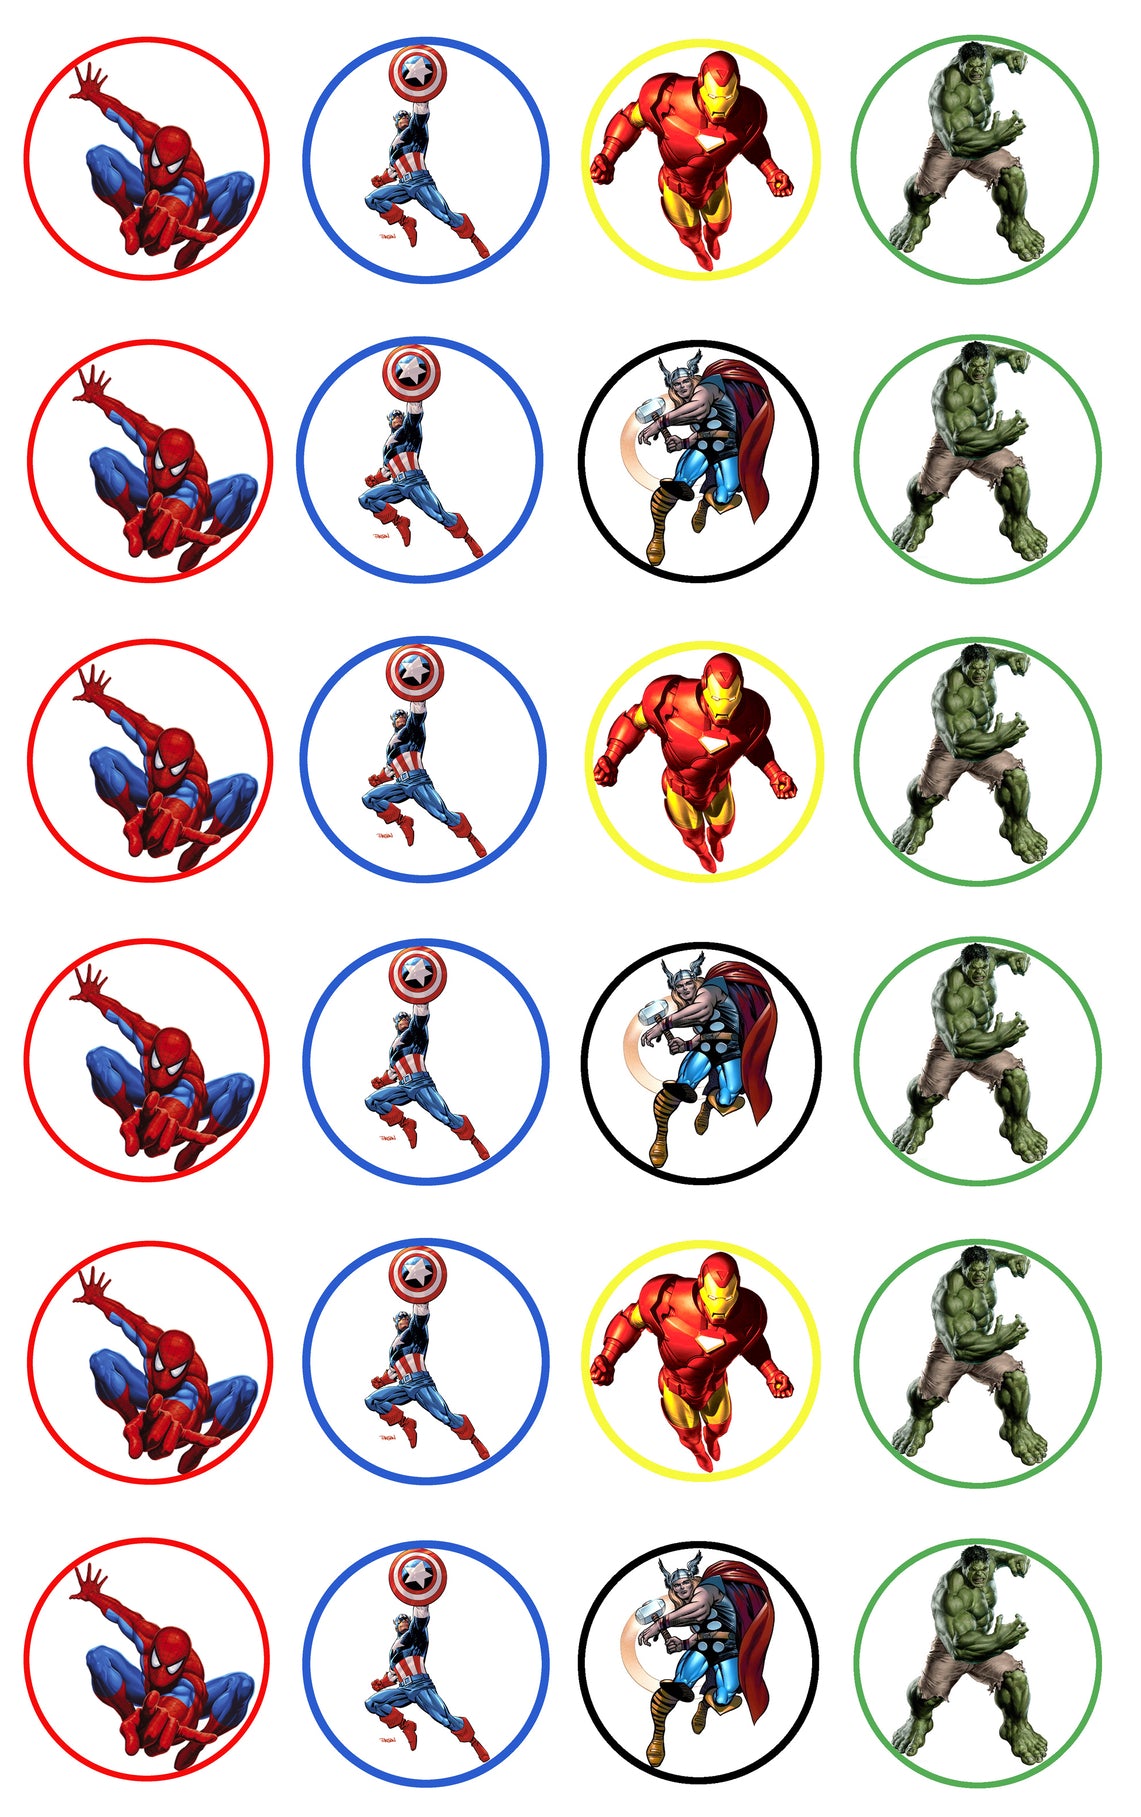 Marvel Avengers Spider-Man the Hulk Iron Man Captain America Thor Edible Cupcake Topper Images ABPID06268